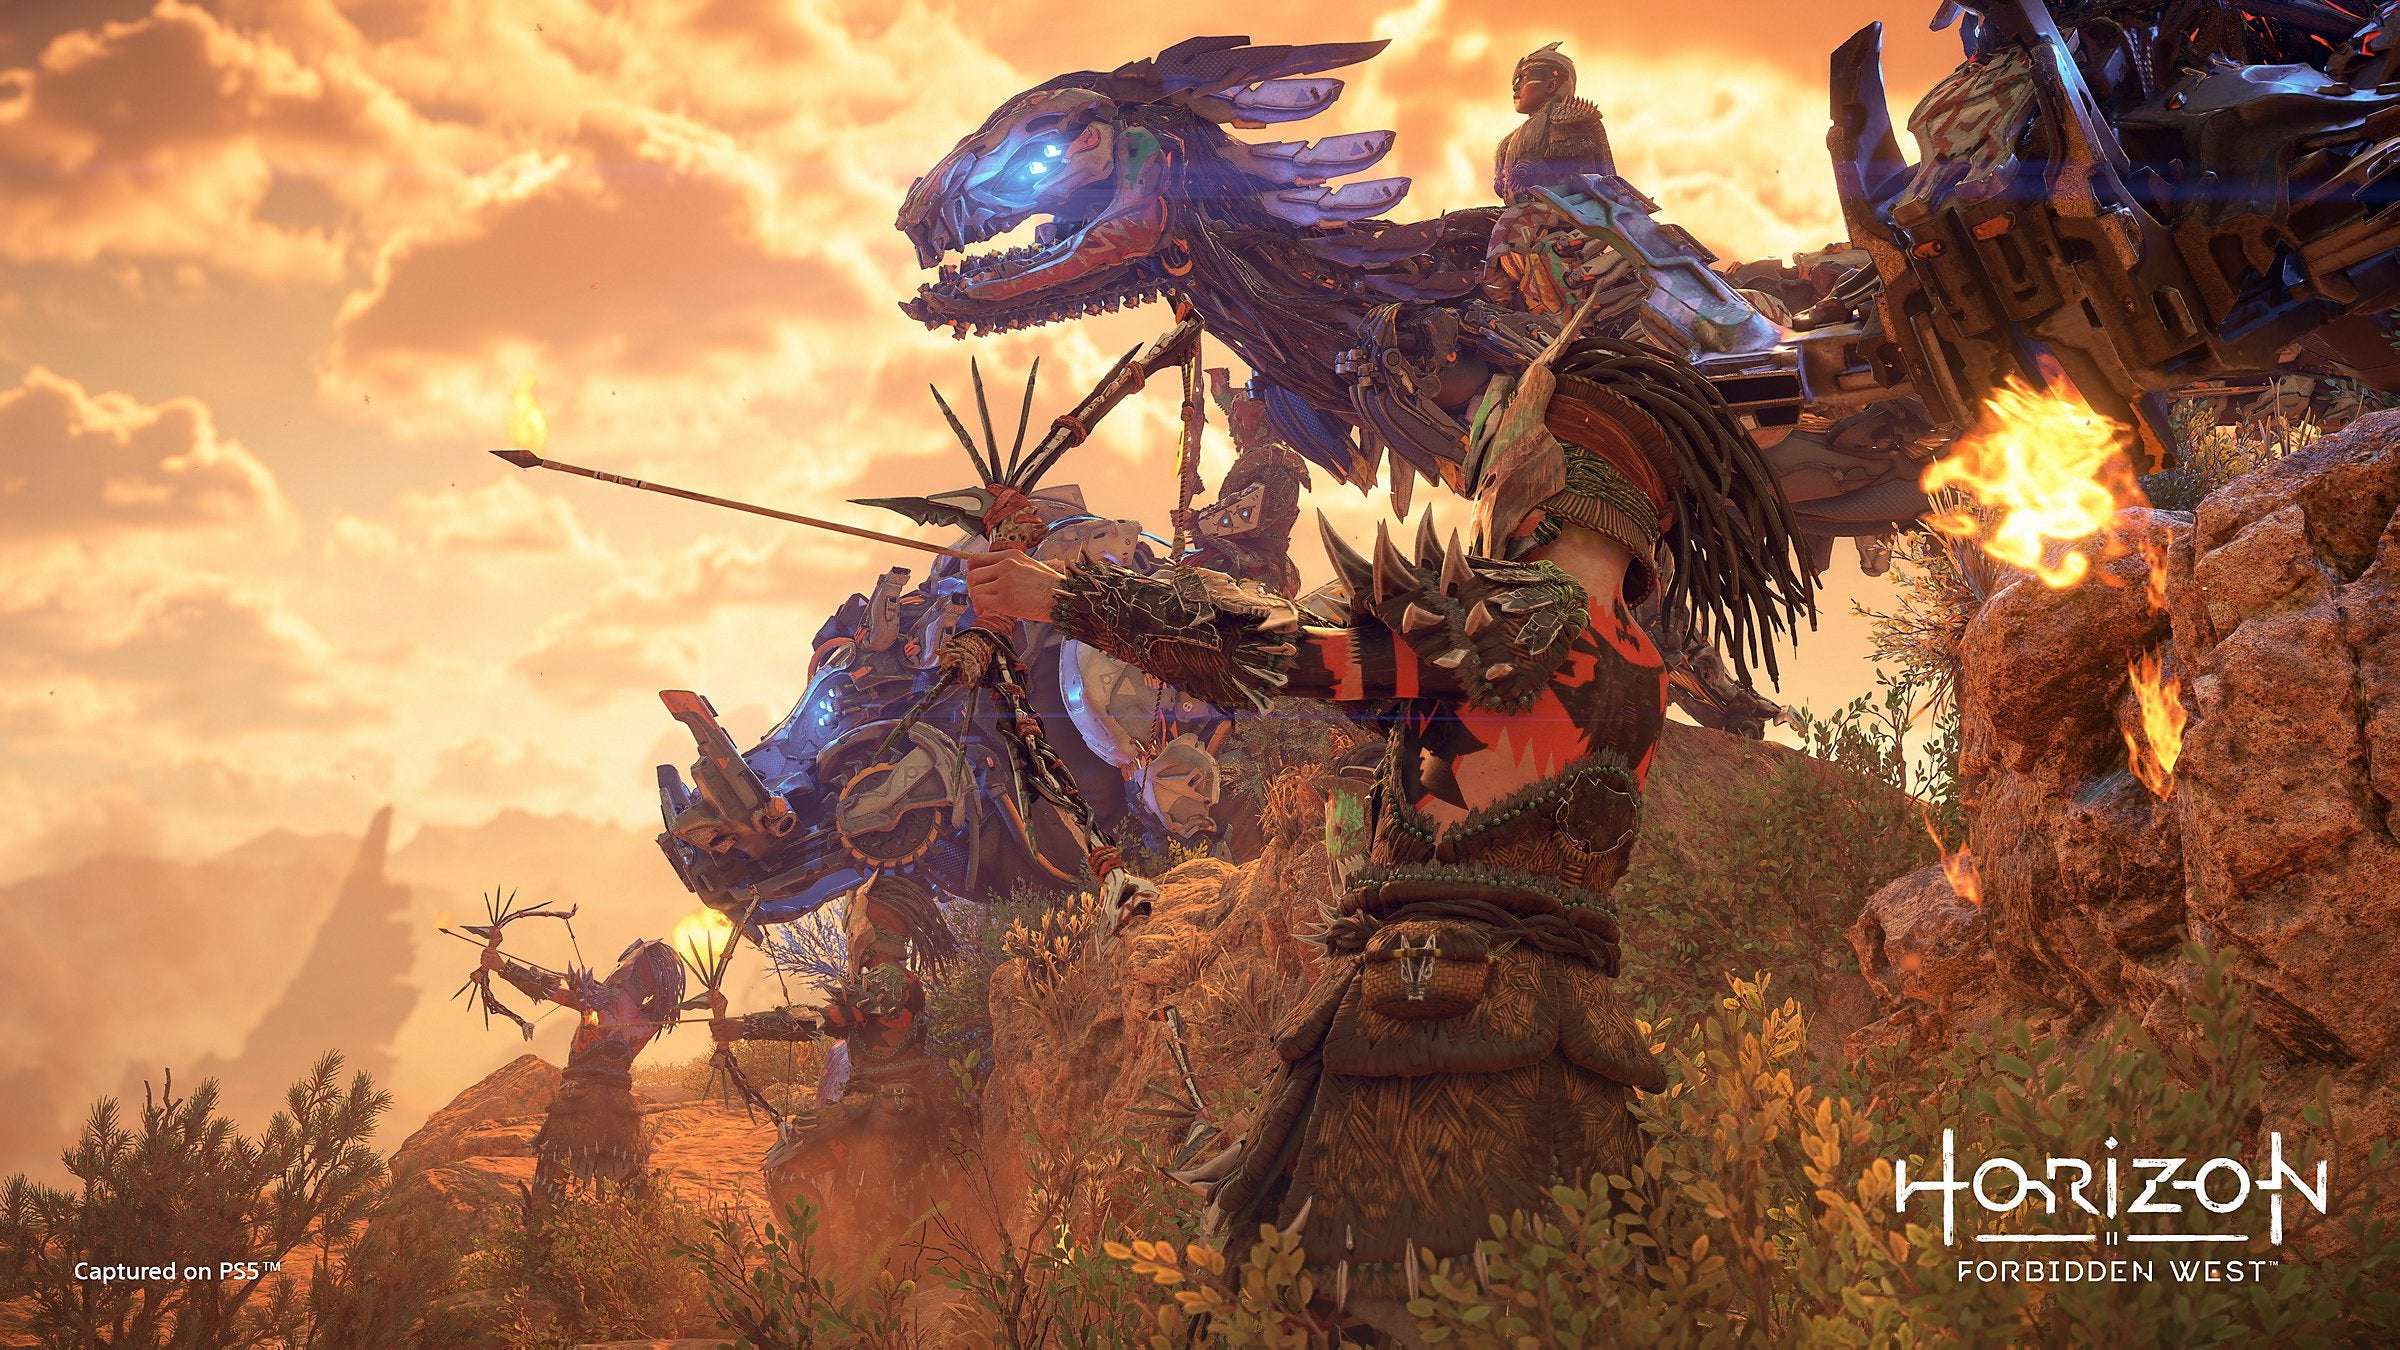 image for Horizon Forbidden West DLC Rumored To Be In Development